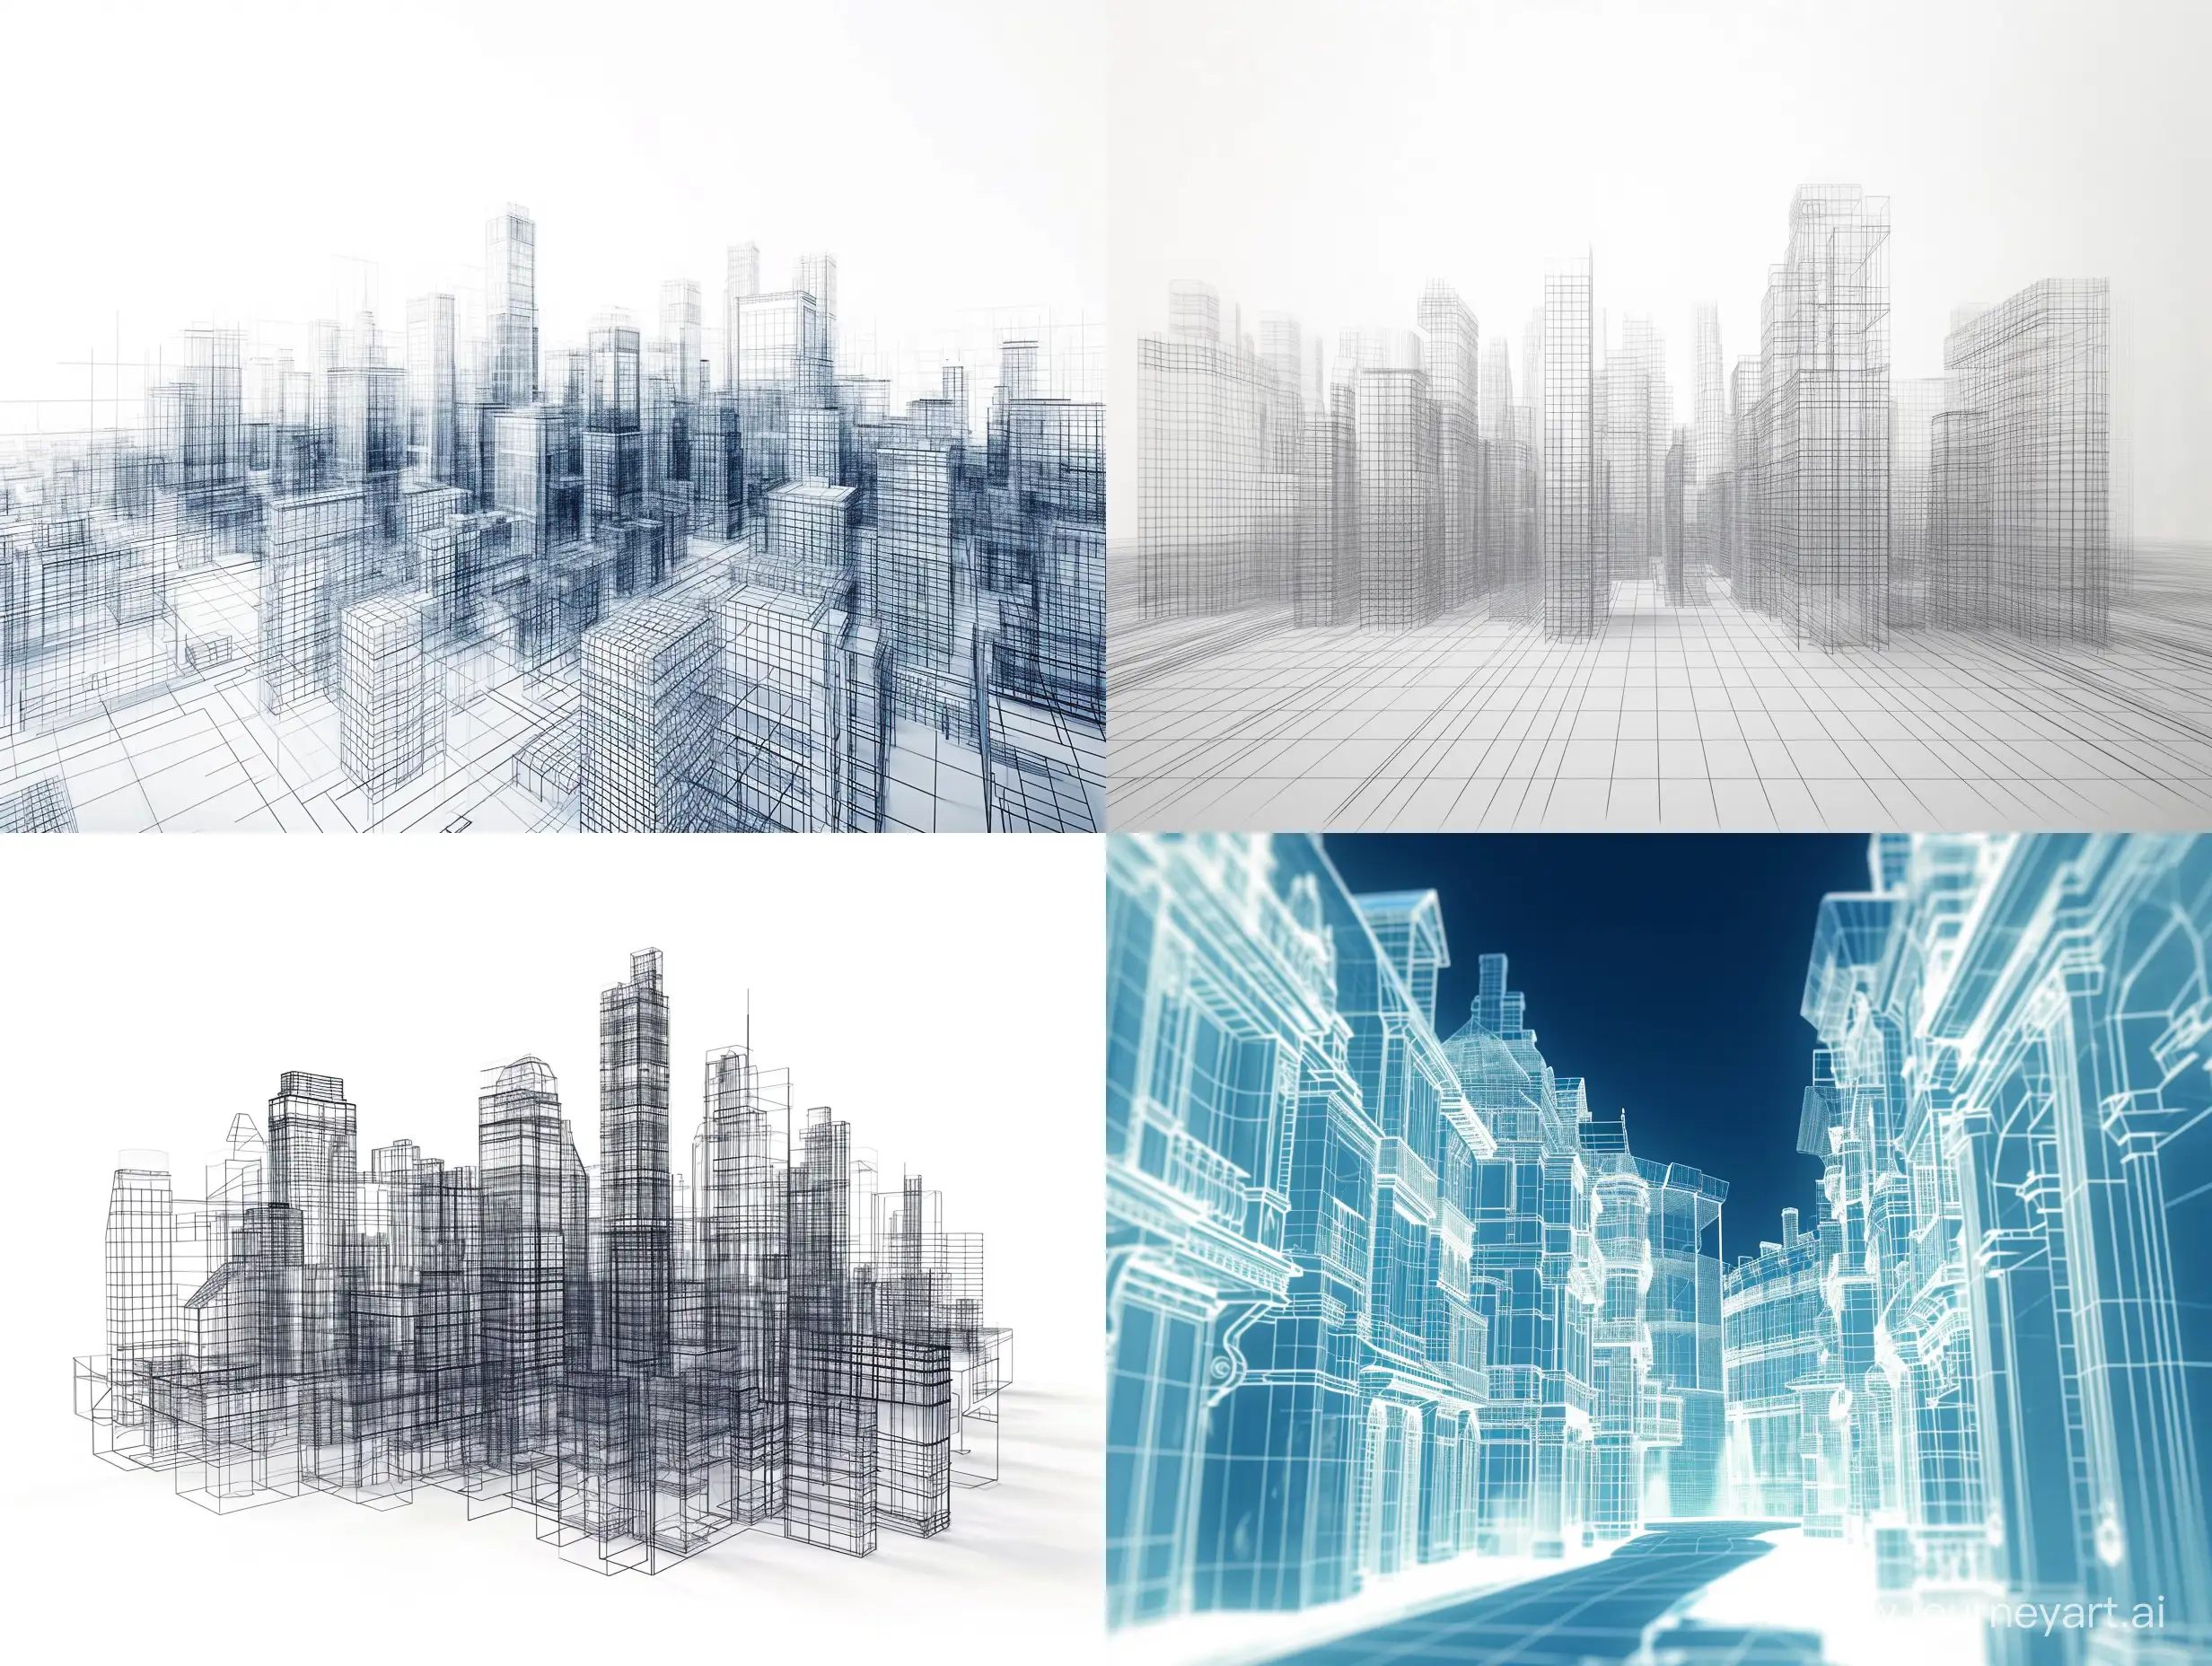 a city made of 3d wireframe structures